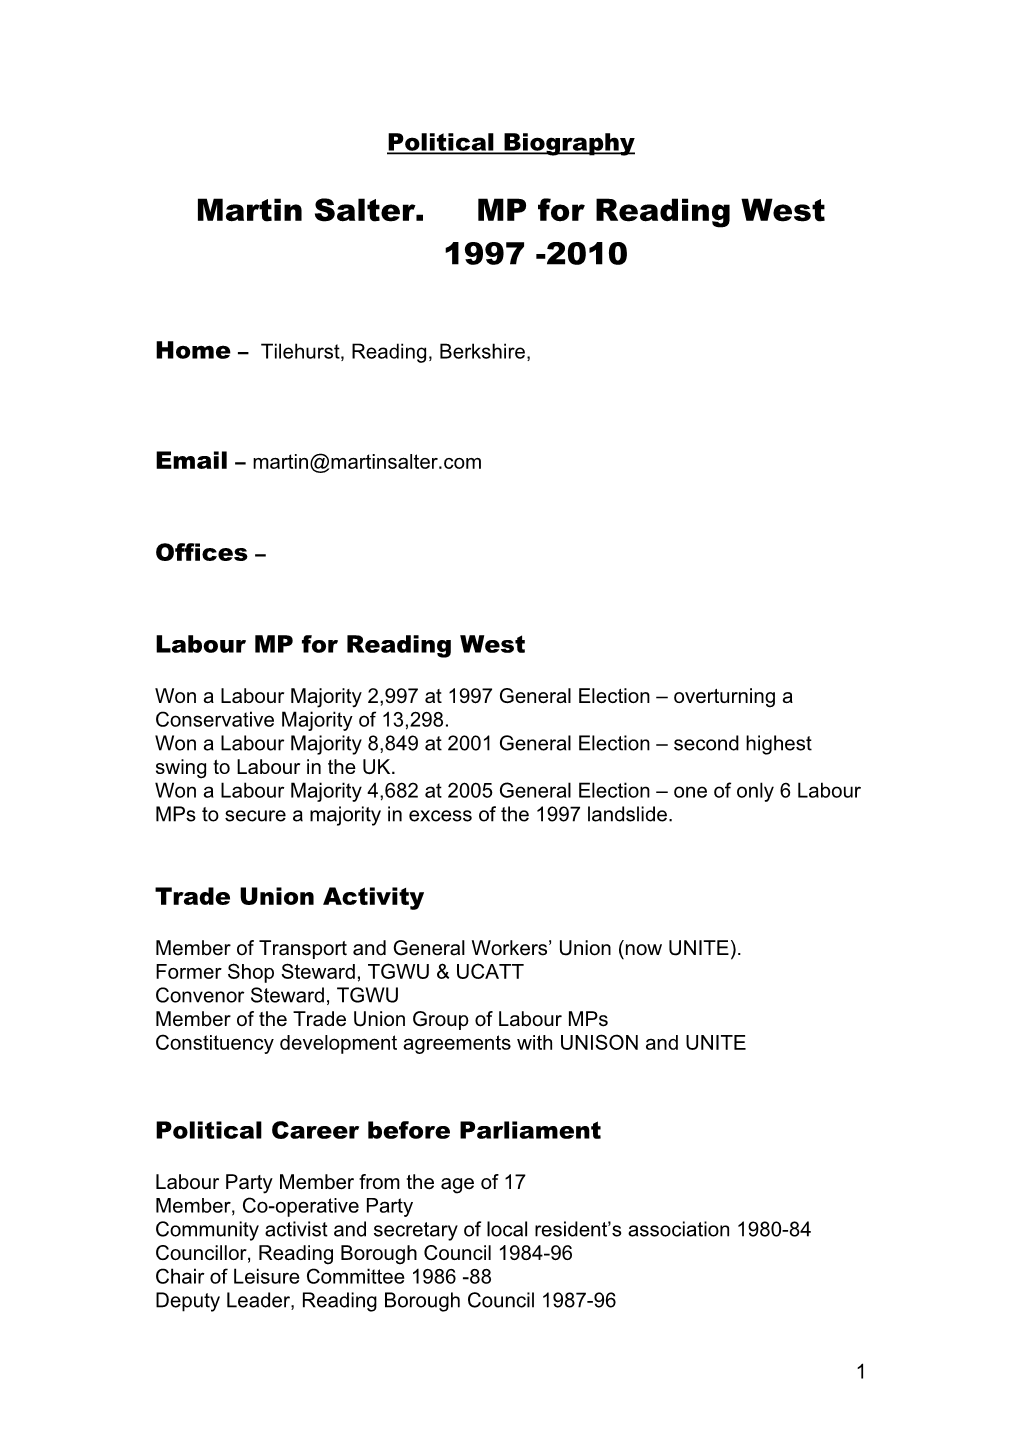 Martin Salter. MP for Reading West 1997 -2010